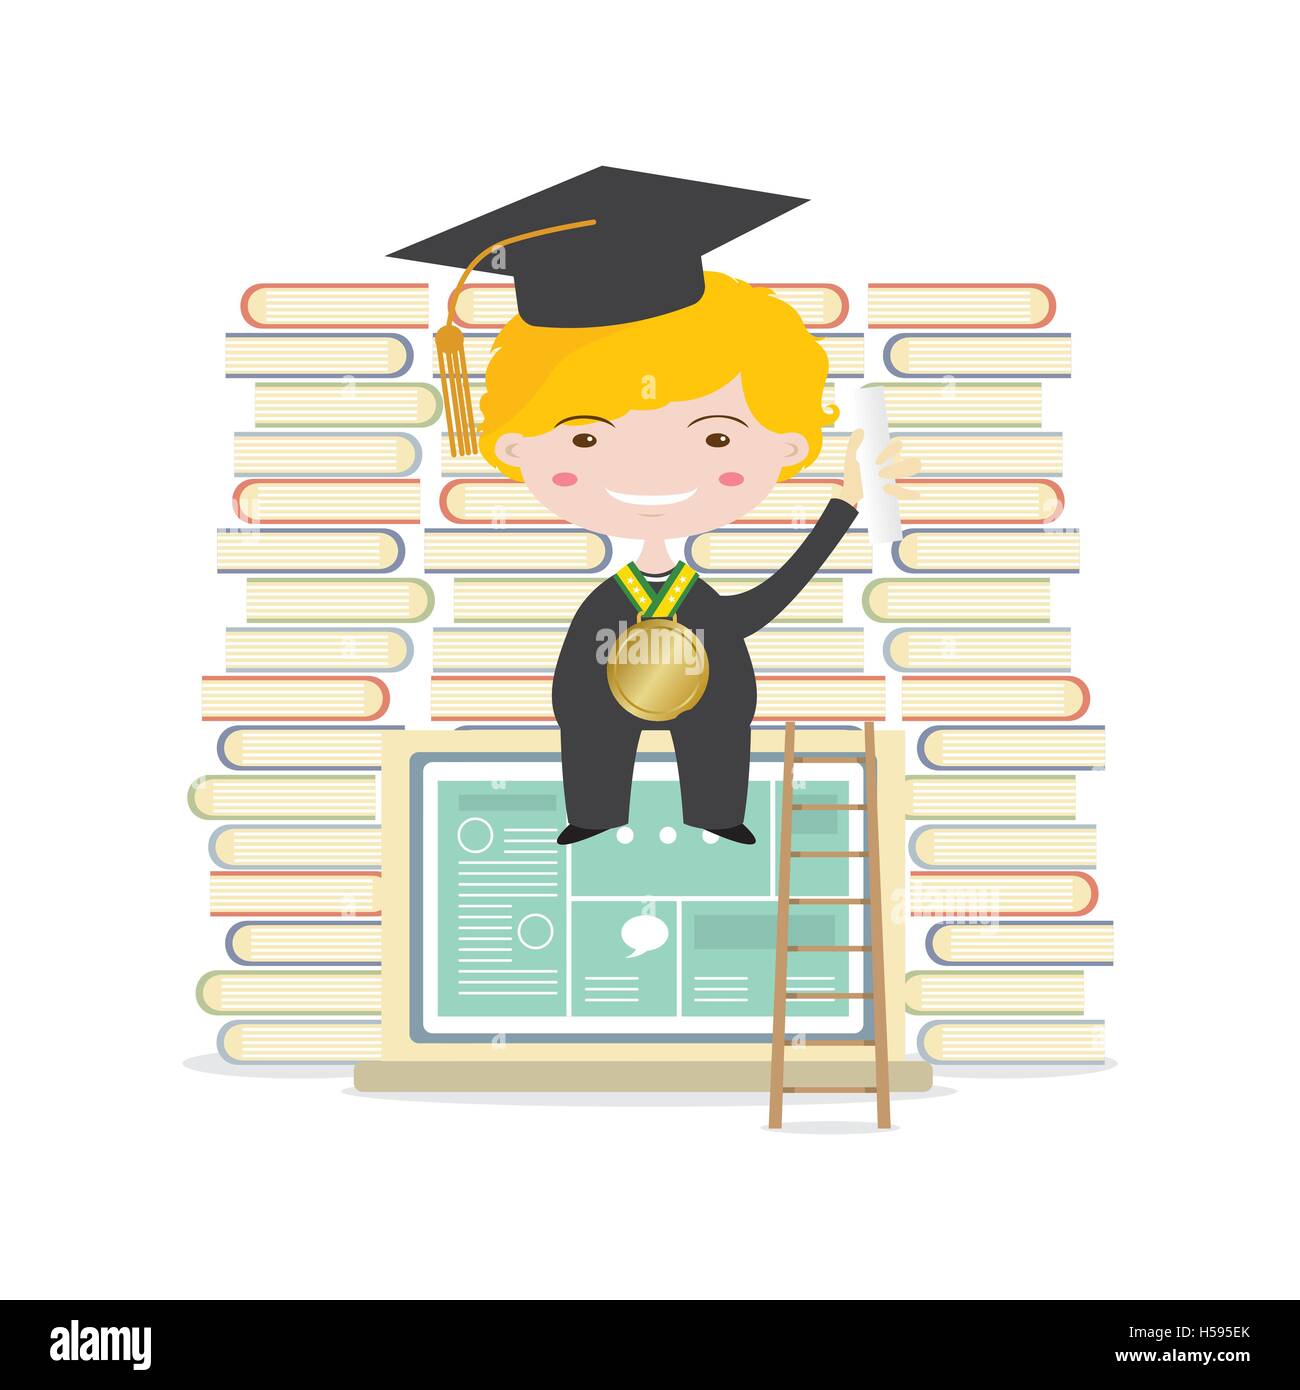 Happy Students Sit On Laptop With Books And Ladder Represent Education Concept Vector Illustration Stock Vector